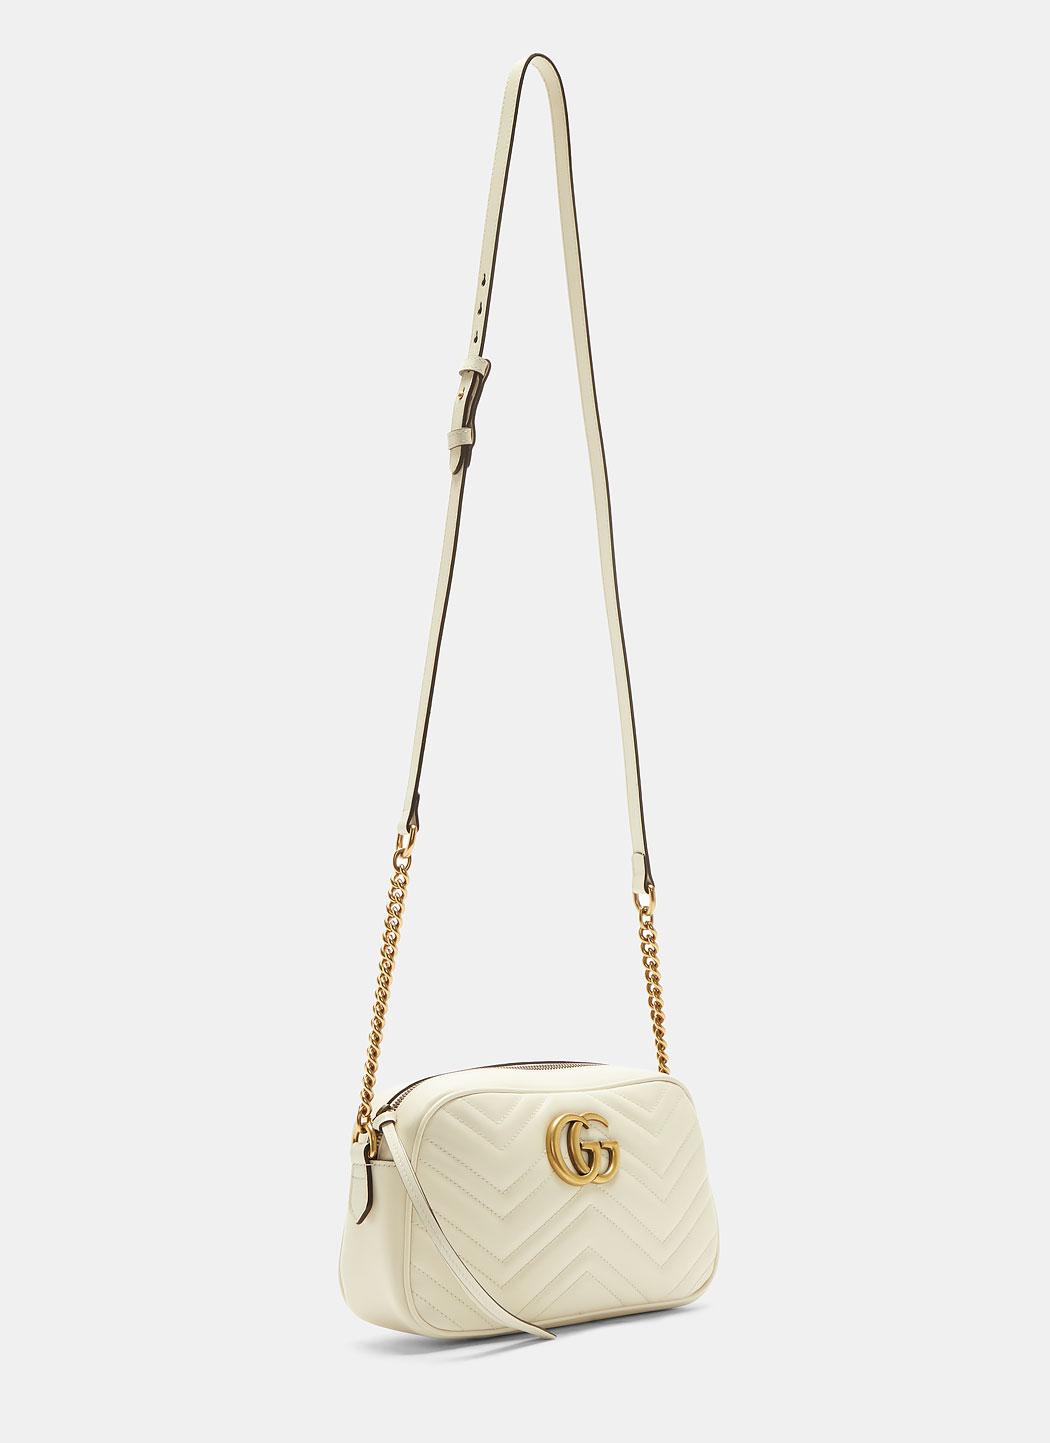 Lyst - Gucci Gg Marmont Matelassé Small Shoulder Bag In Ivory in White